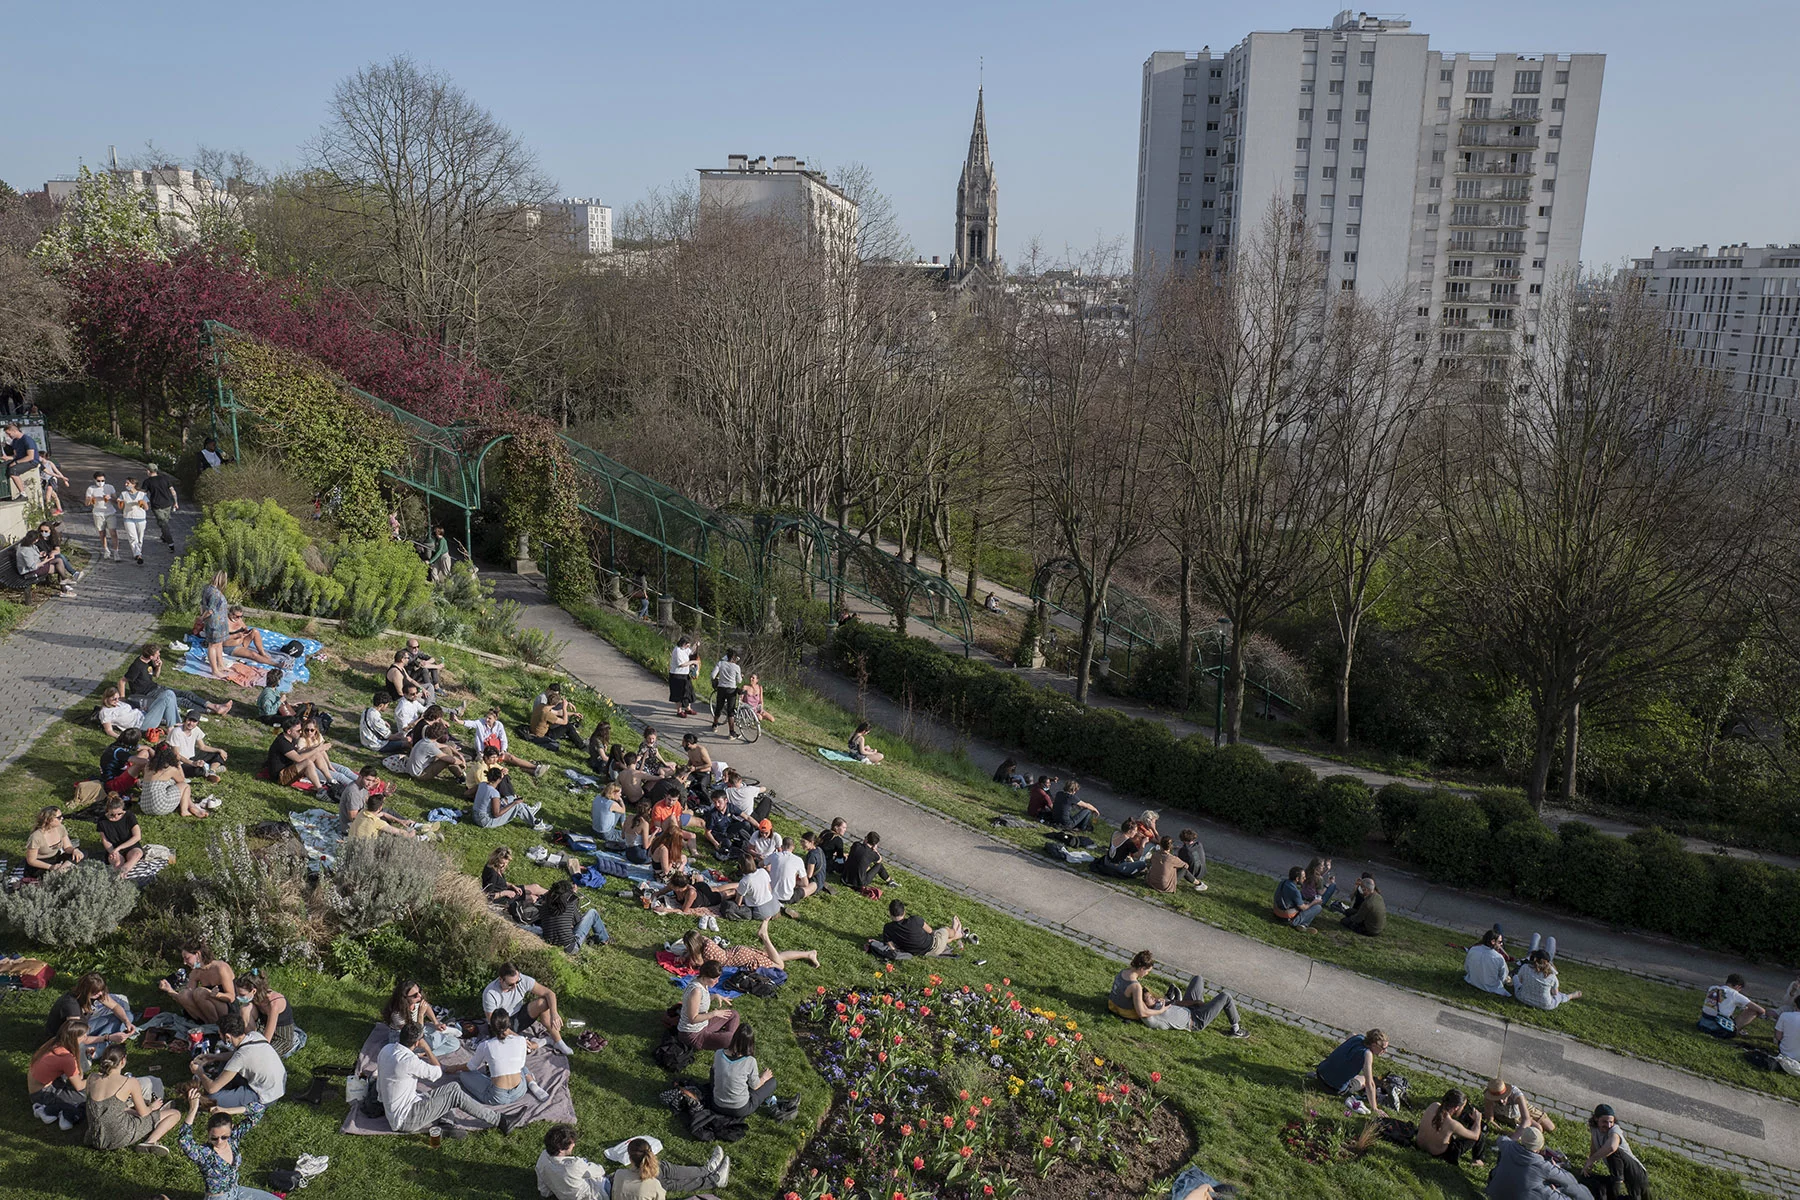 People enjoying warm weather at the Belleville park in the 20th arrondissement of Paris